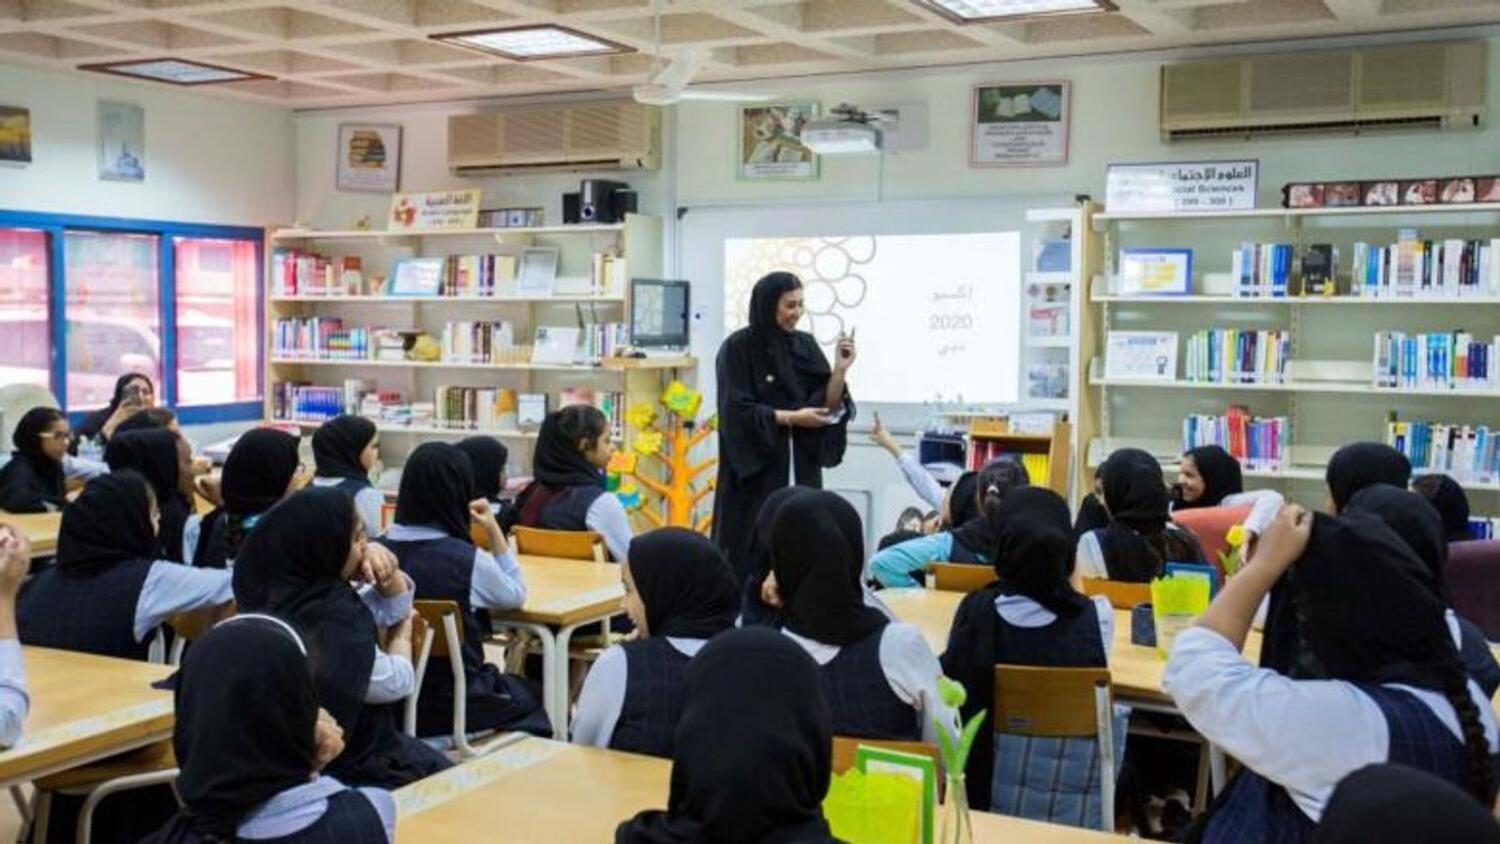 New UAE weekend: Authority denies reports about new school timings - News | Khaleej Times